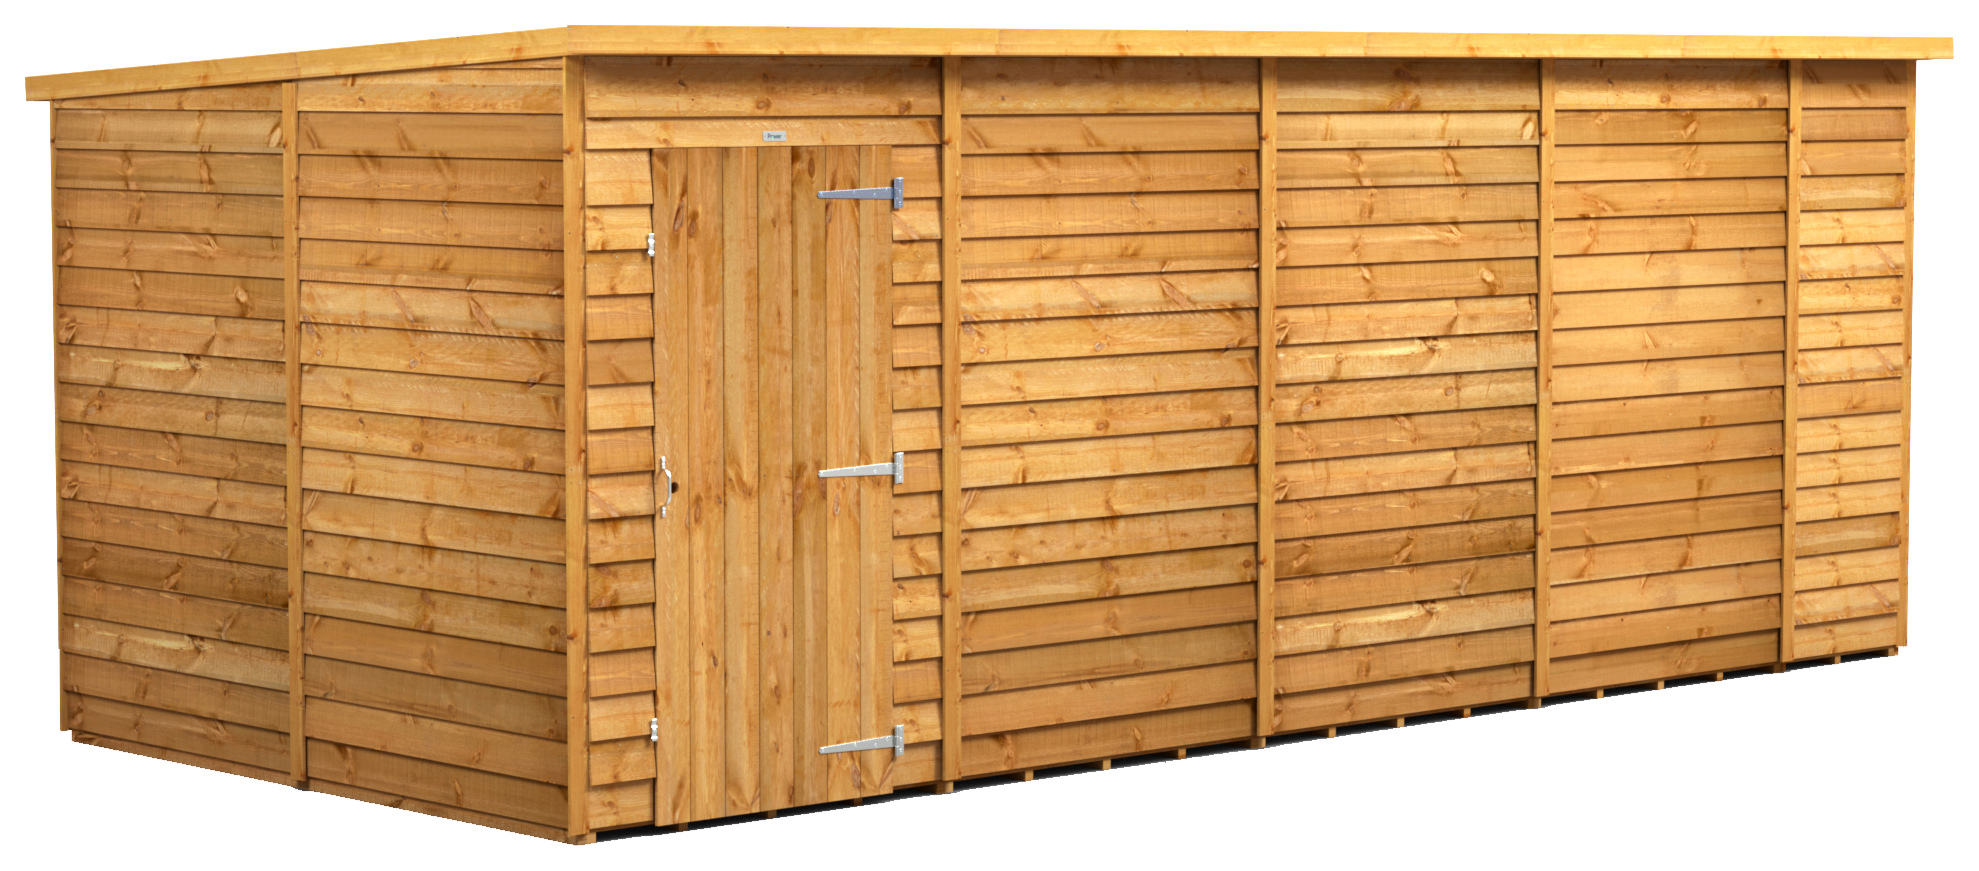 Power Sheds 18 x 8ft Pent Overlap Dip Treated Windowless Shed